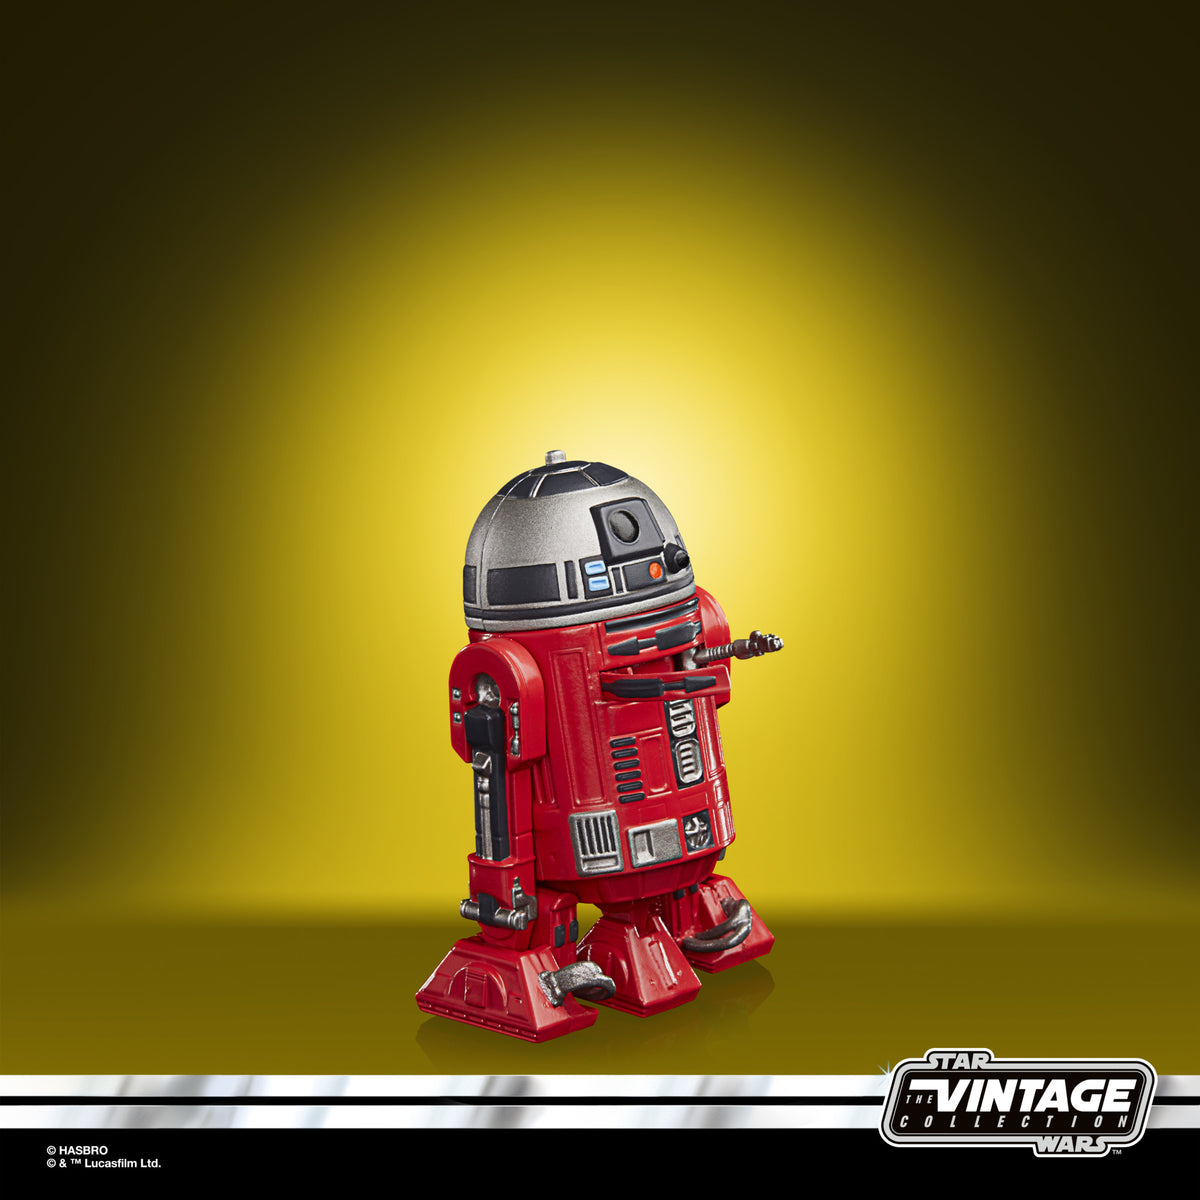 Sportman prins kaping Star Wars The Vintage Collection R2-SHW (Antoc Merrick's Droid) – Hasbro  Pulse